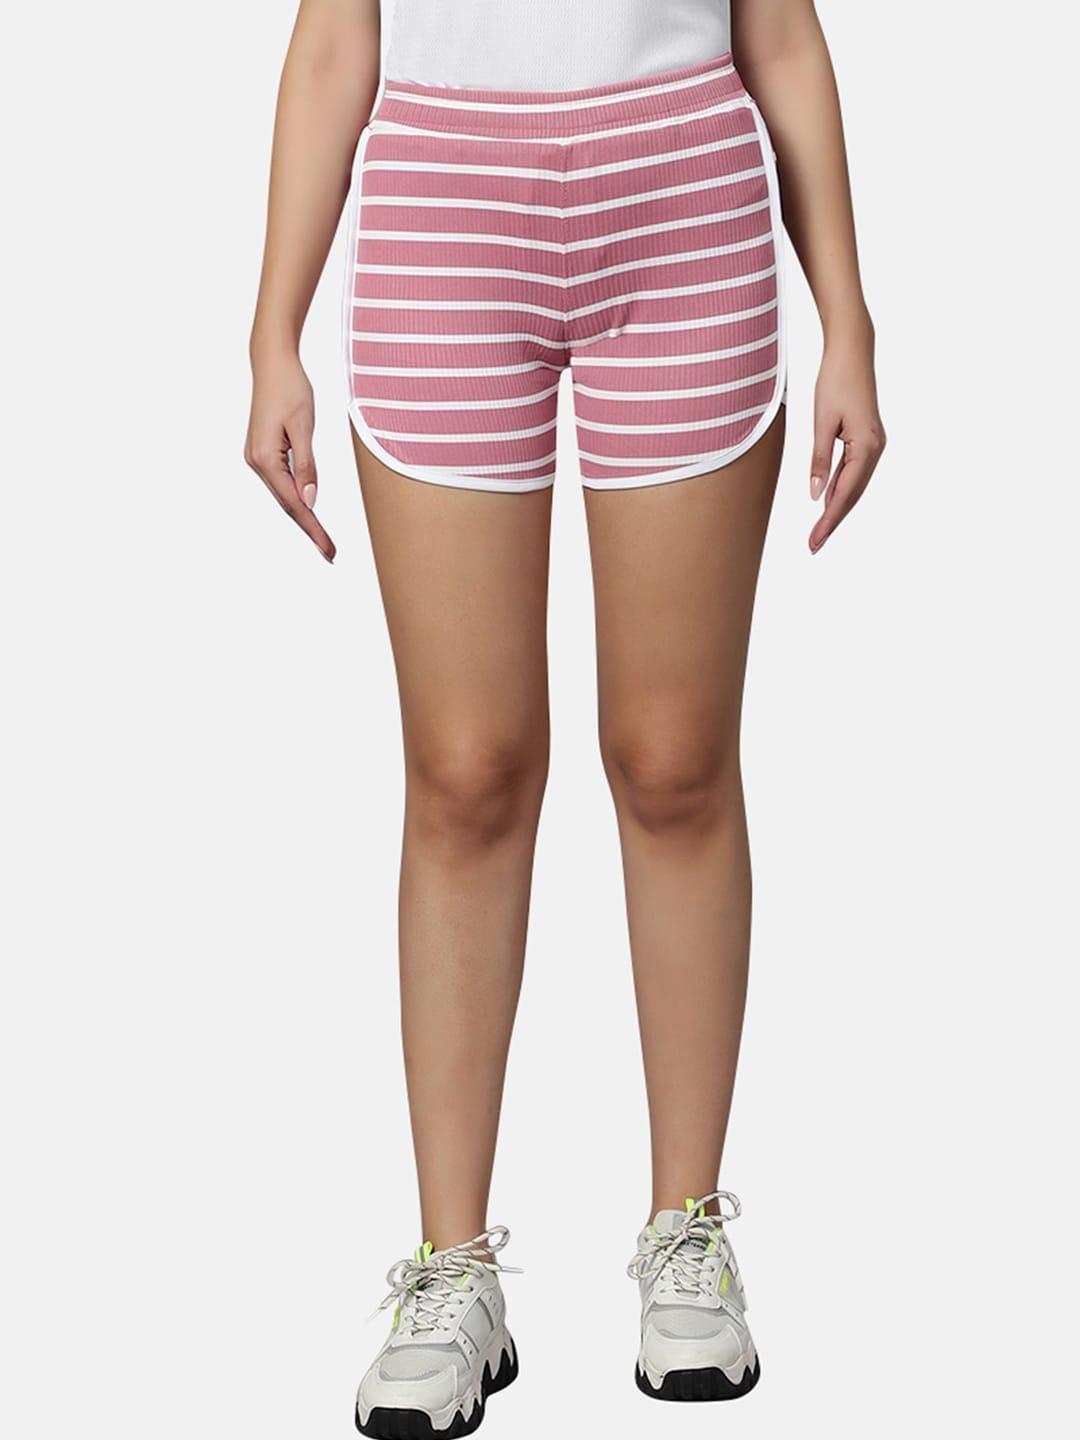 omtex-women-pink-striped-outdoor-with-technology-shorts